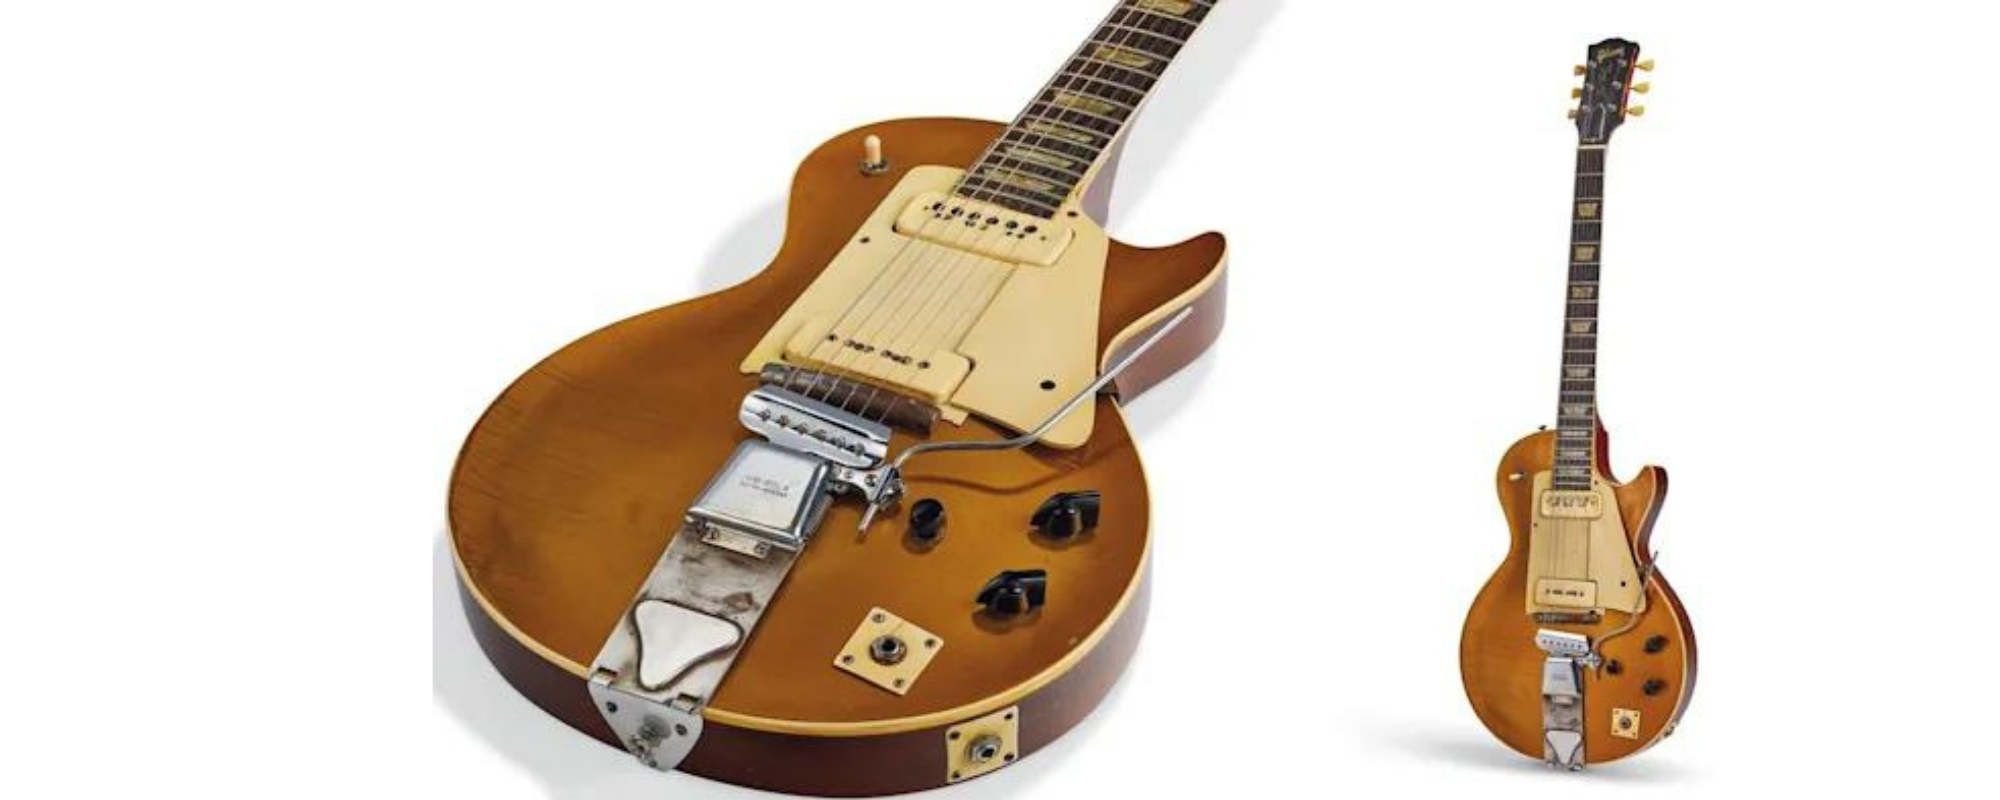 Want to Play Les Paul’s Electric Guitar? It’ll Cost You